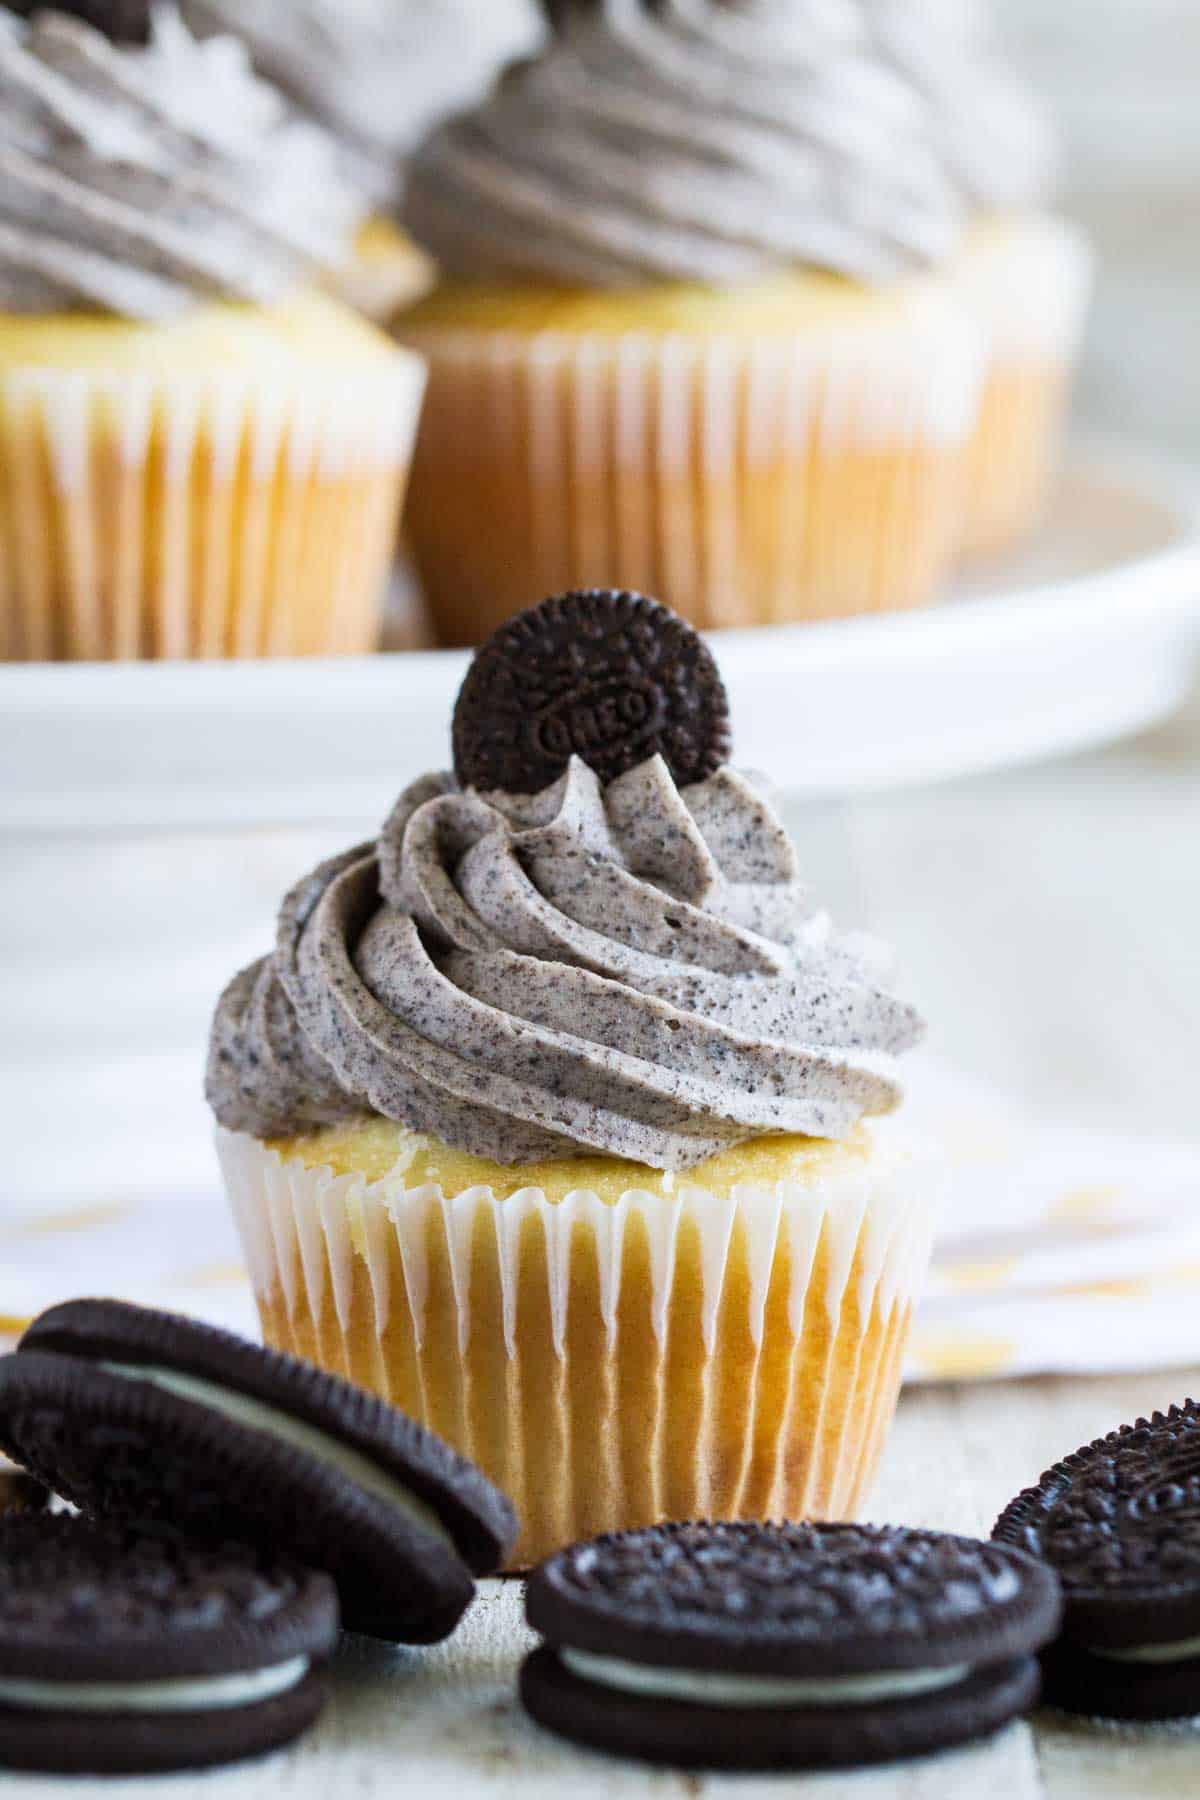 Oreo Cupcake Recipe filled with Marshmallow Filling and topped with Oreo buttercream.